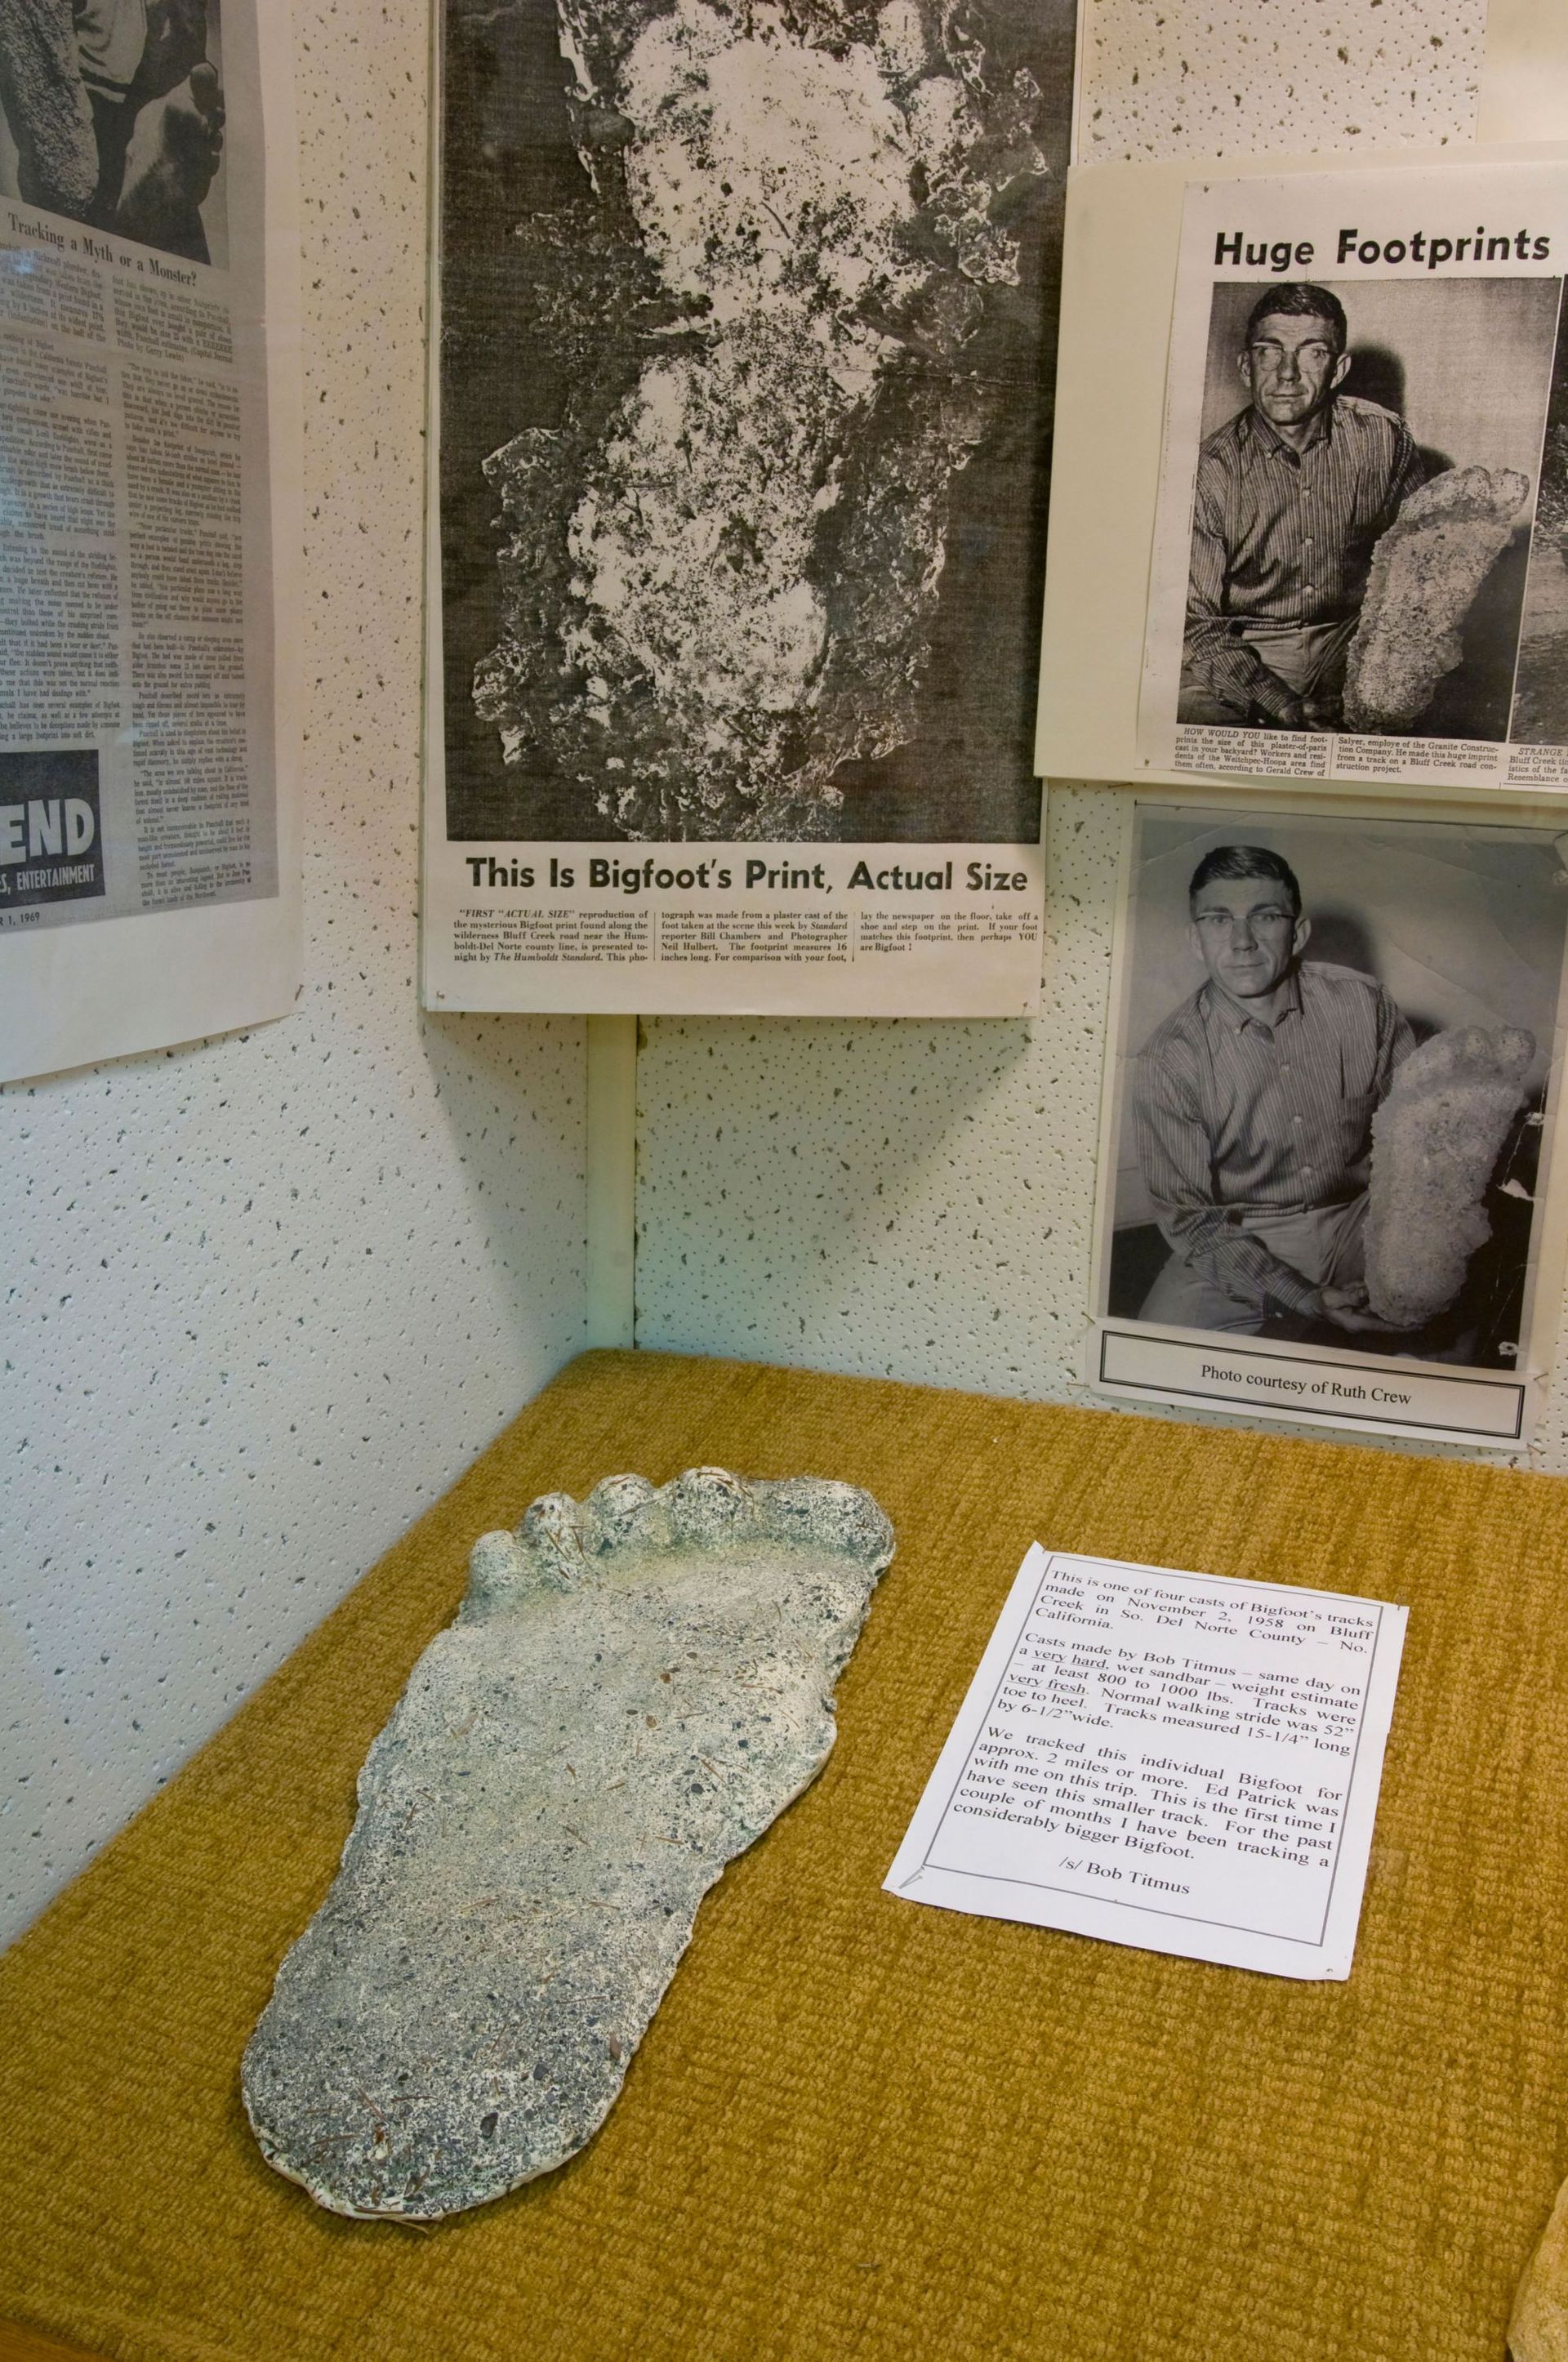 Bigfoot artifacts and footprint casts on display at the Willow Creek - China Flat Museum, Willow Creek, California